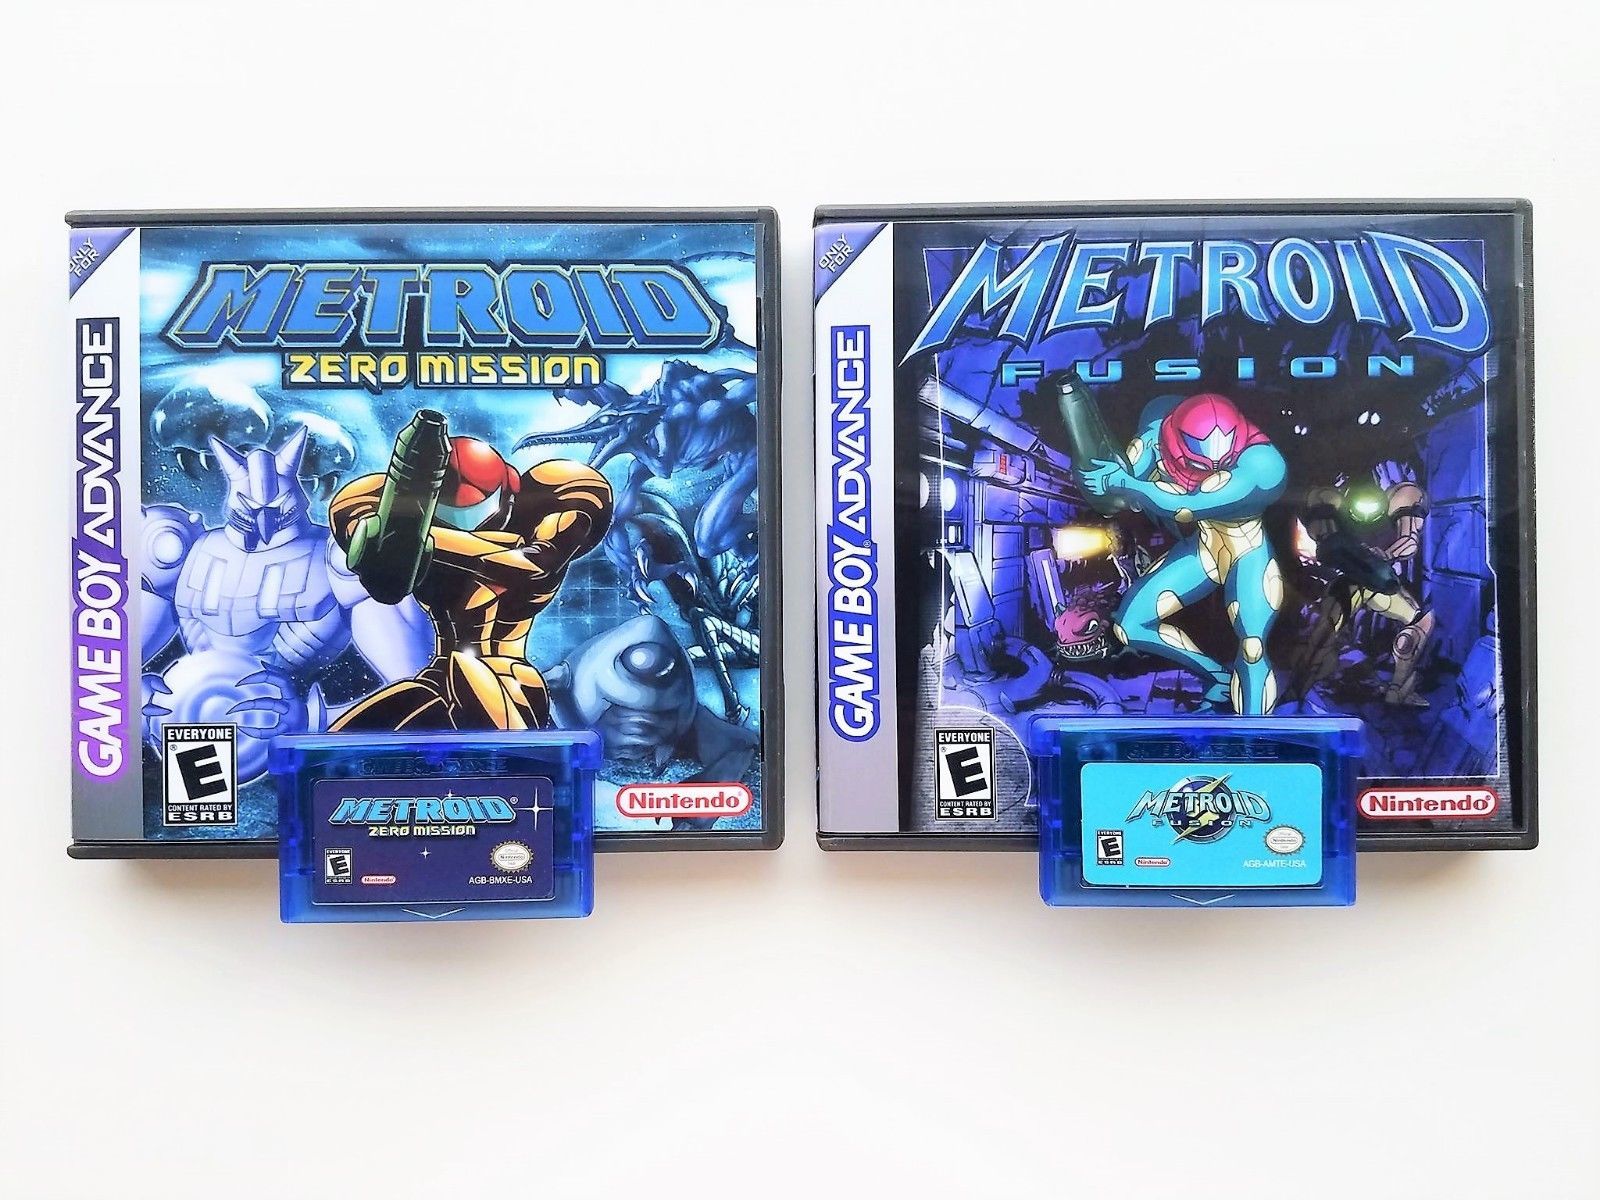 Primary image for Metroid Fusion & Zero Mission w/ Custom Case Bundle (Gameboy Advance - GBA)